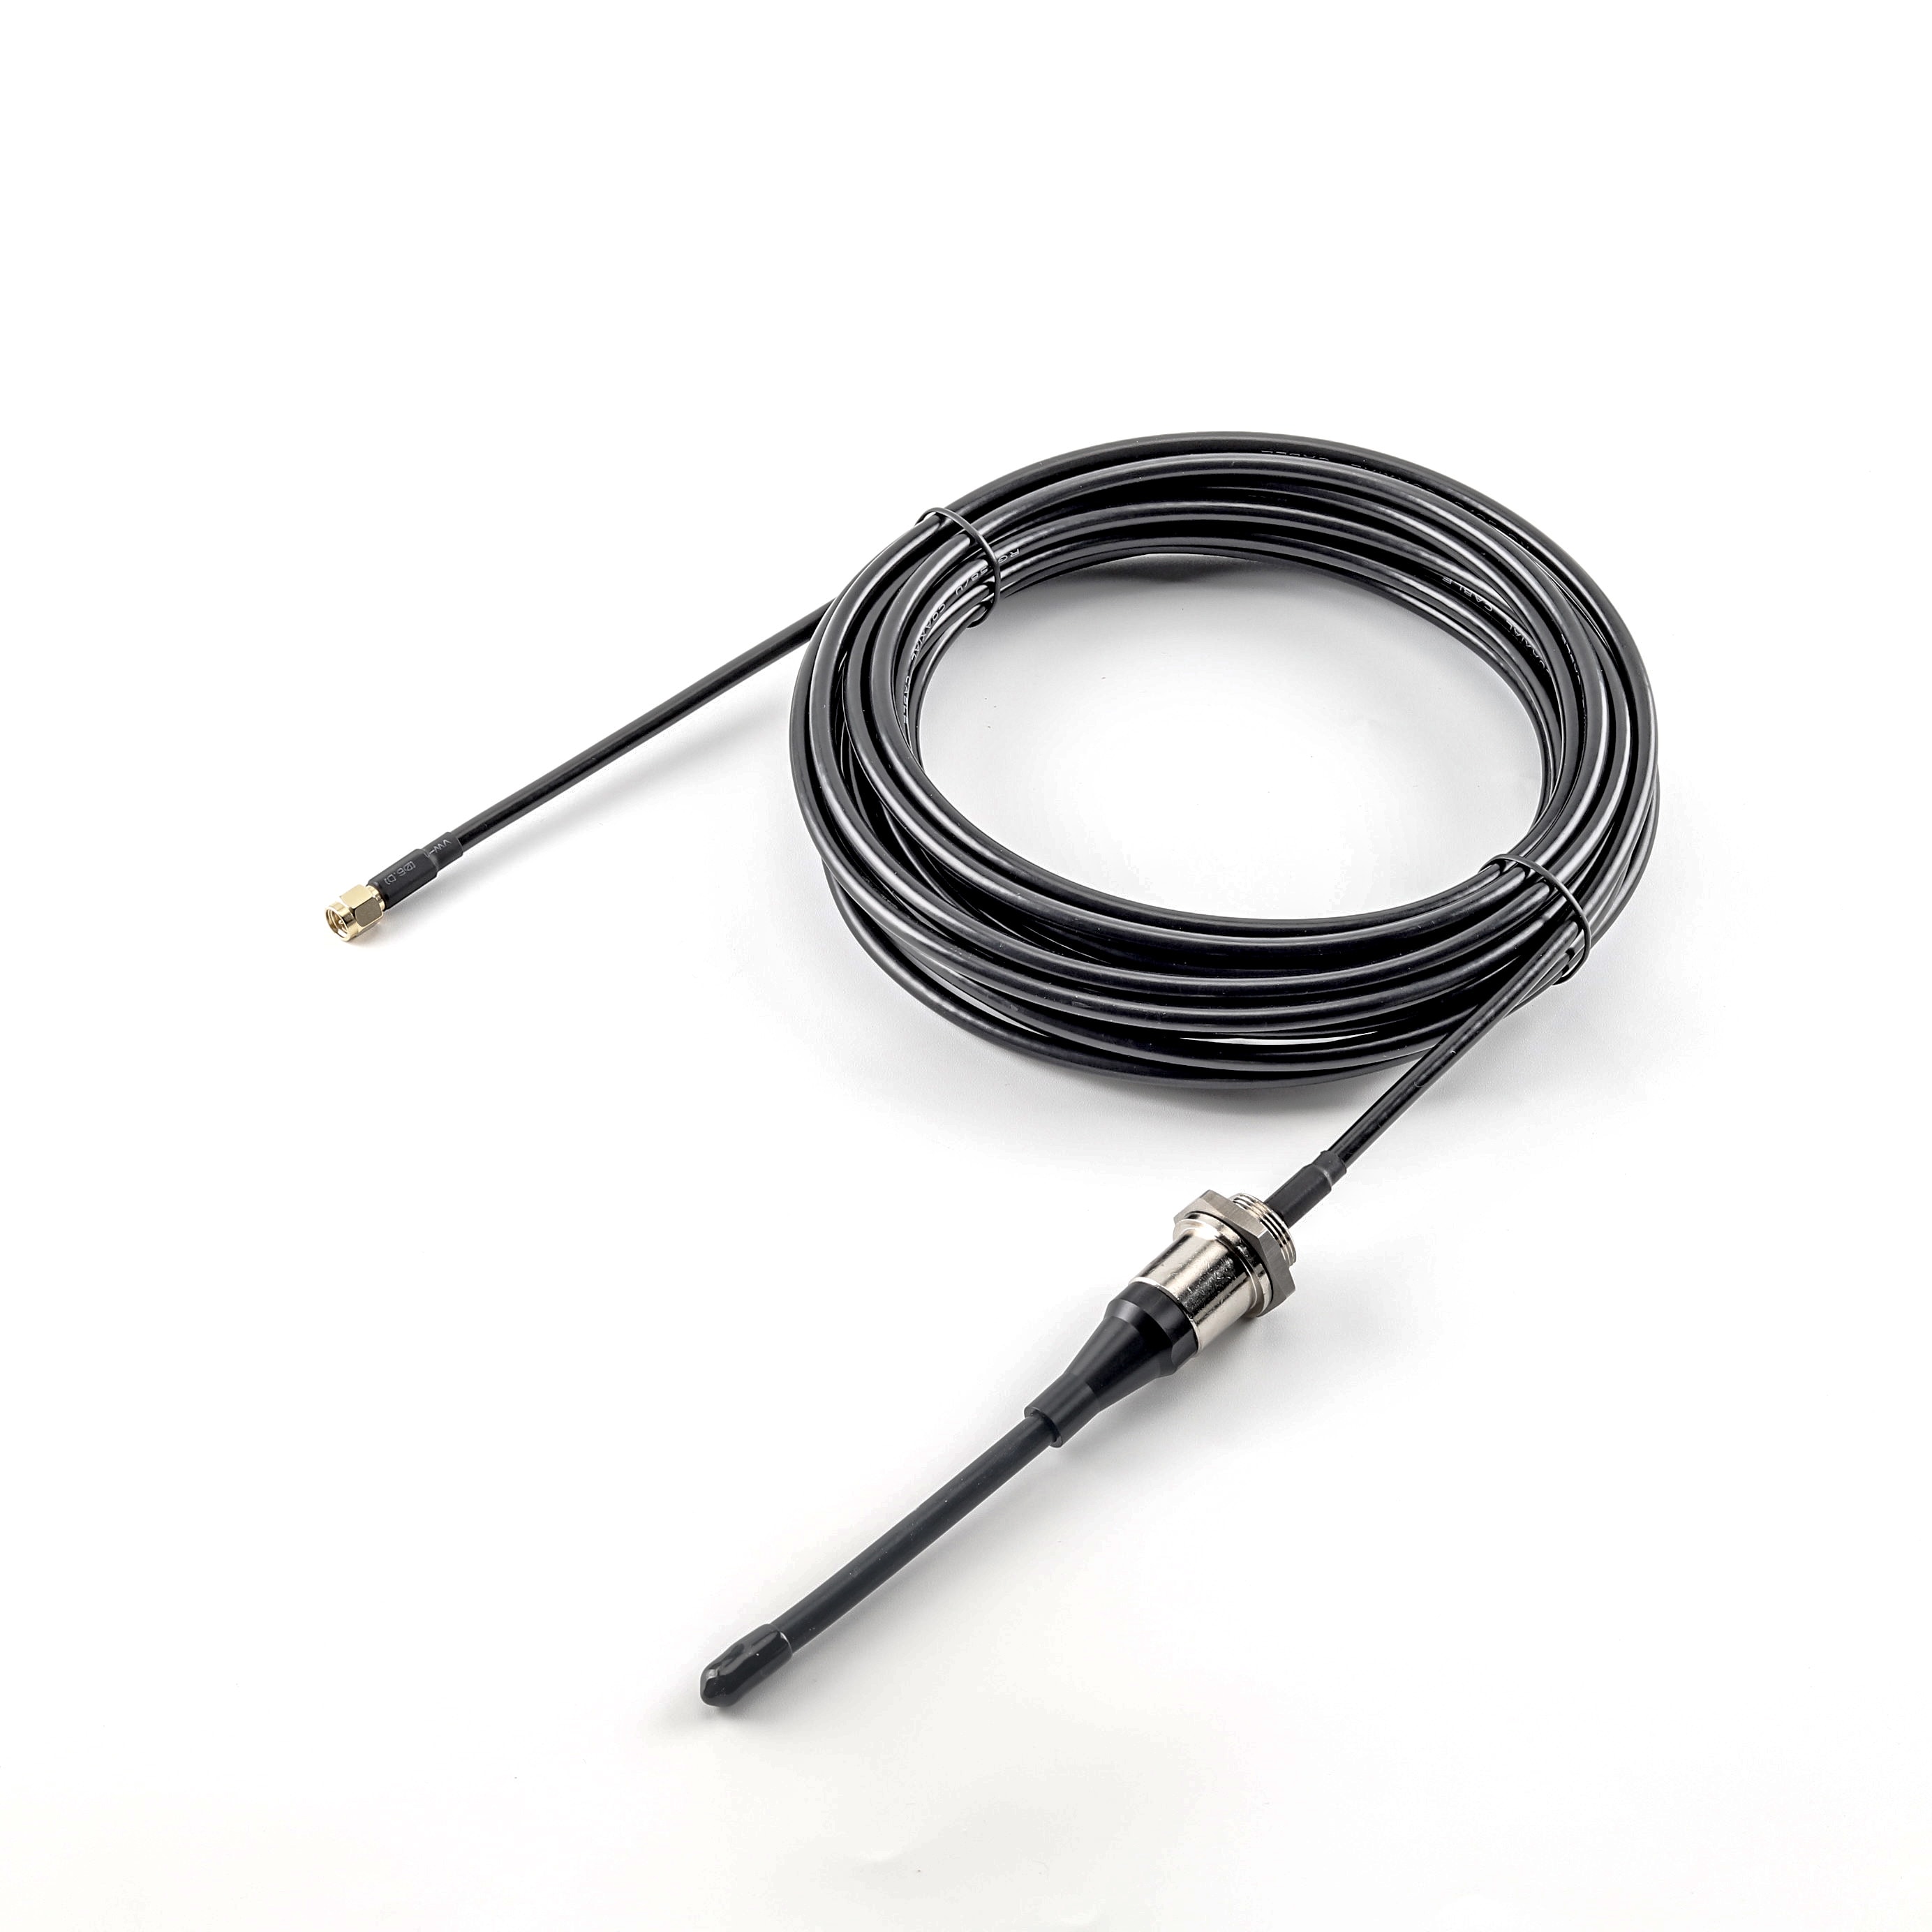 2.4G Antenna SMA Cable Customized RF Cable RG58 Cable AMSONE